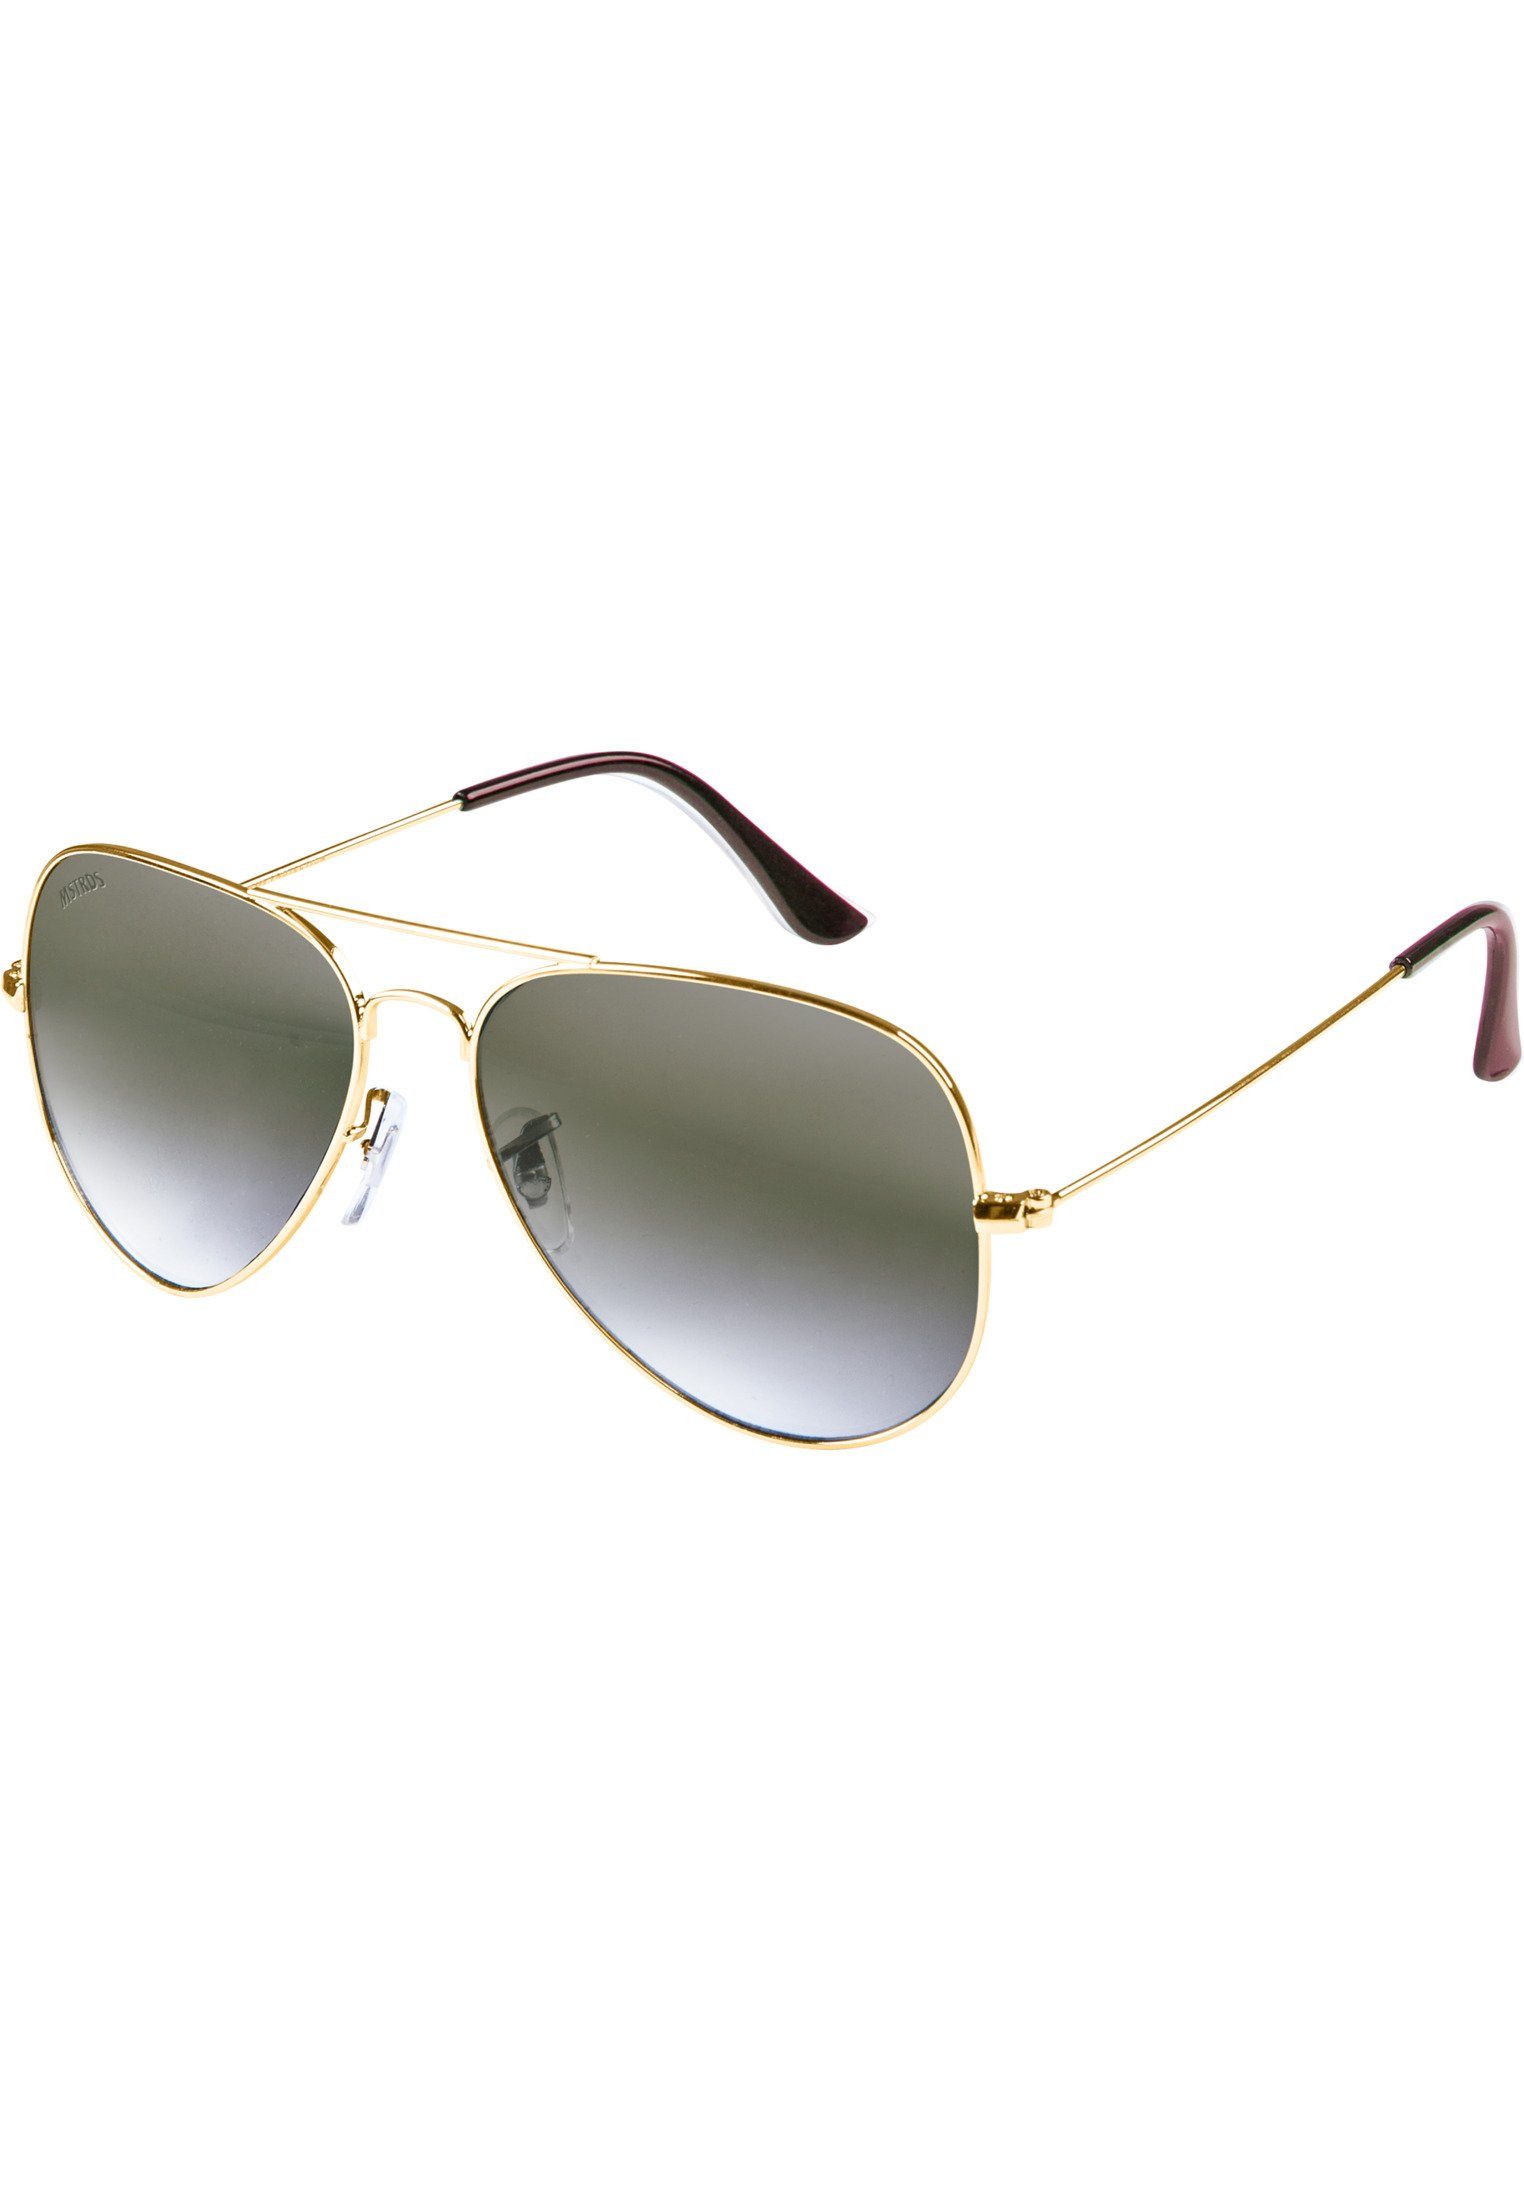 Accessoires Sonnenbrille MSTRDS PureAv gold/grey Youth Sunglasses